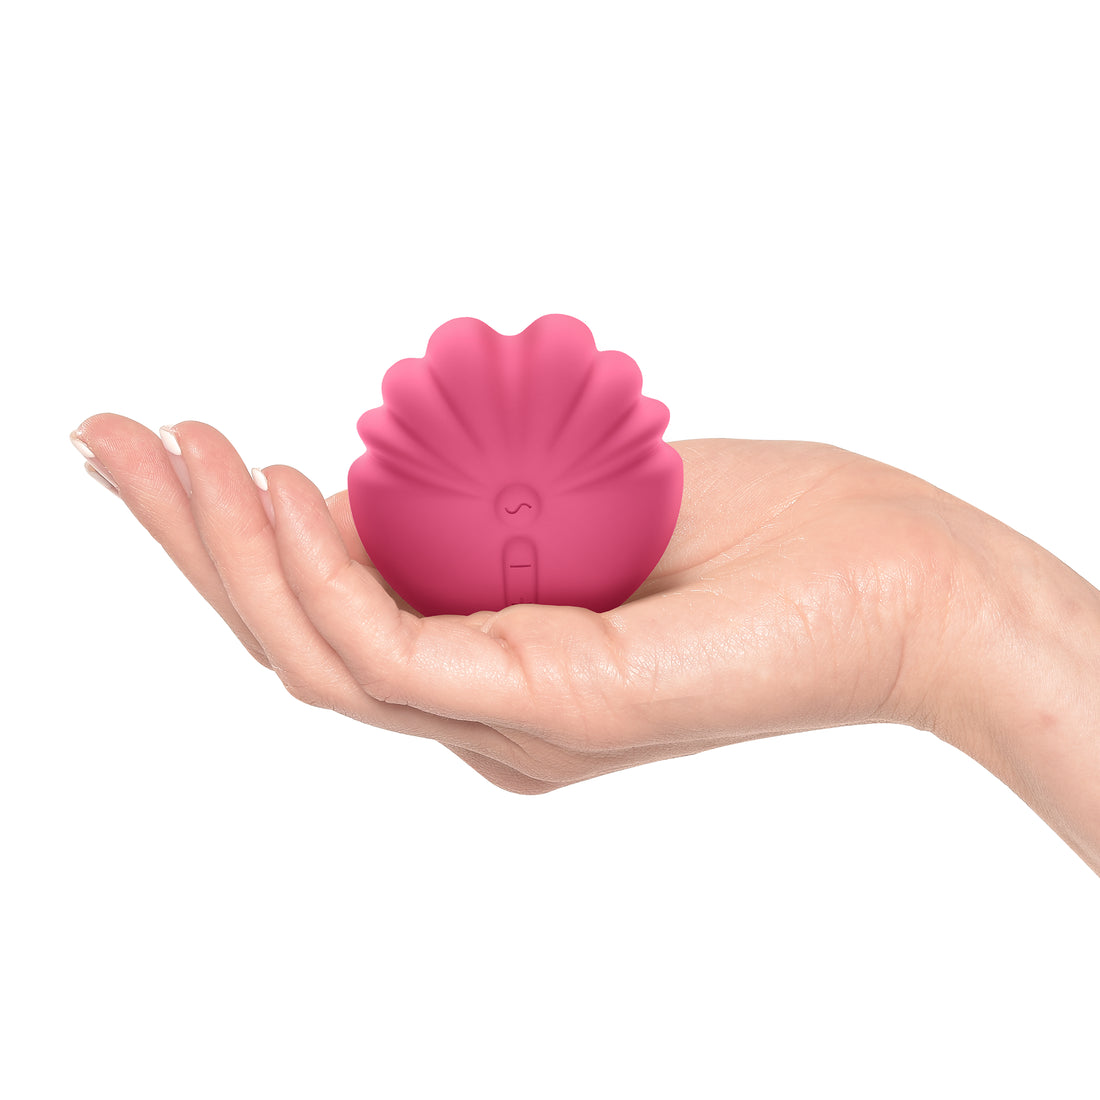 Front-facing shell shape clitoral vibrator pink in the palm of a white woman's hand